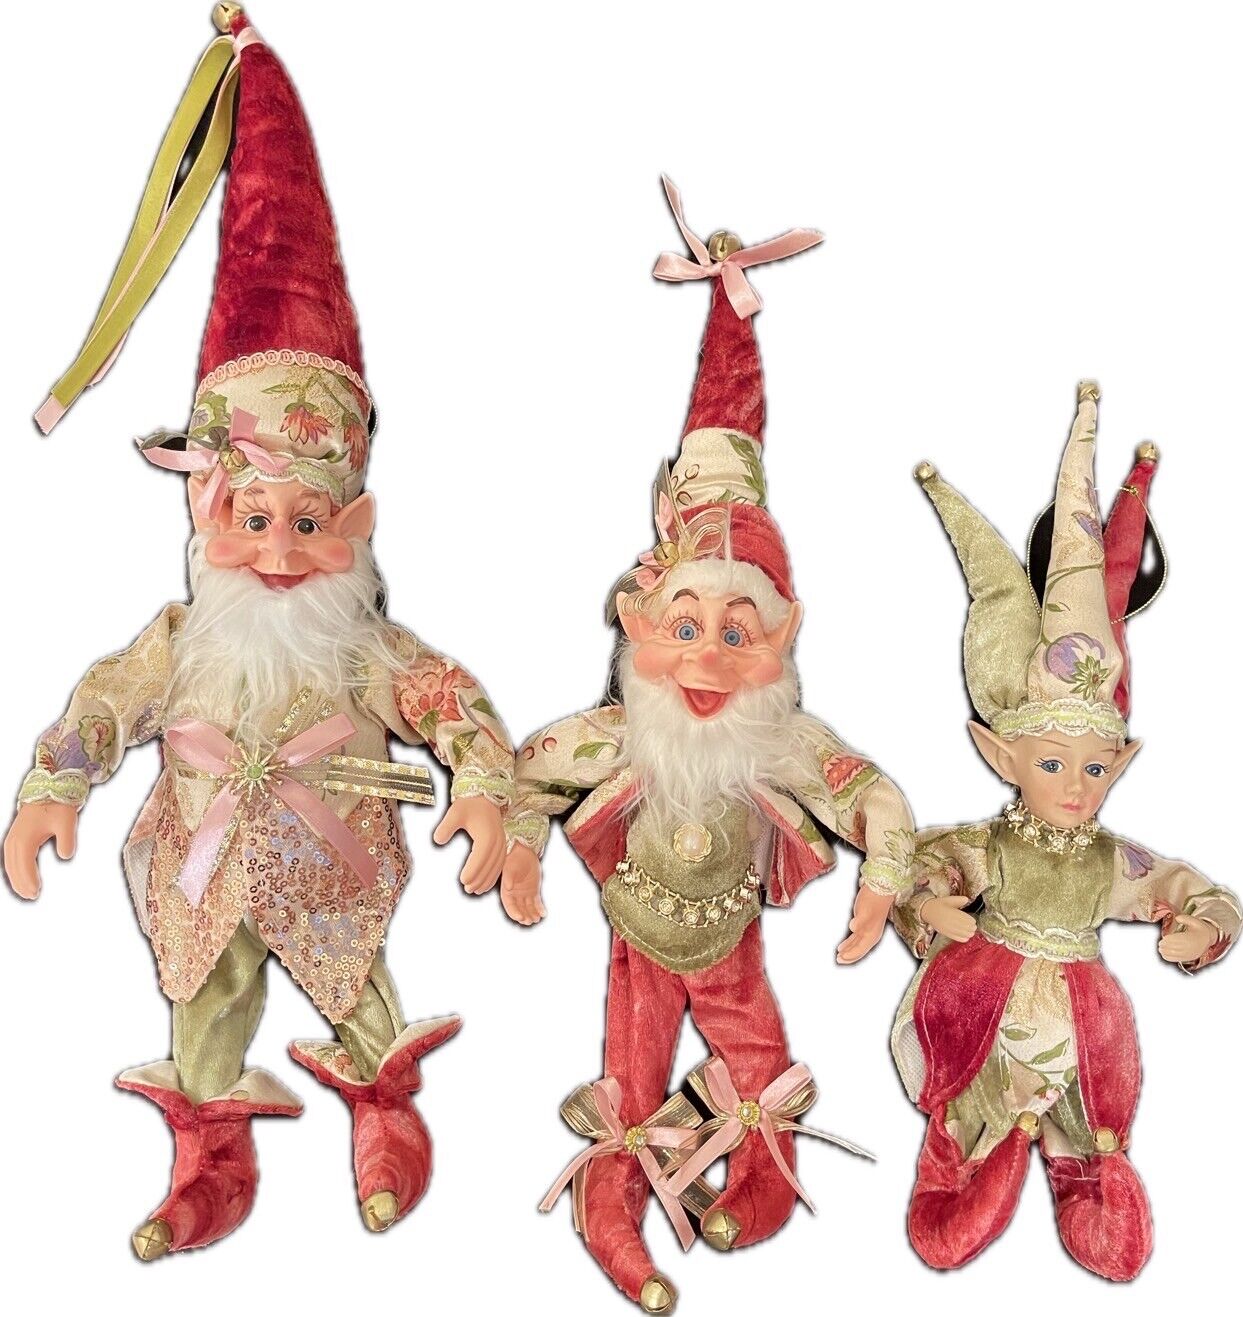 3PC SET - Christmas Handmade Holiday Posable Elves And Jester Figurines / Dolls